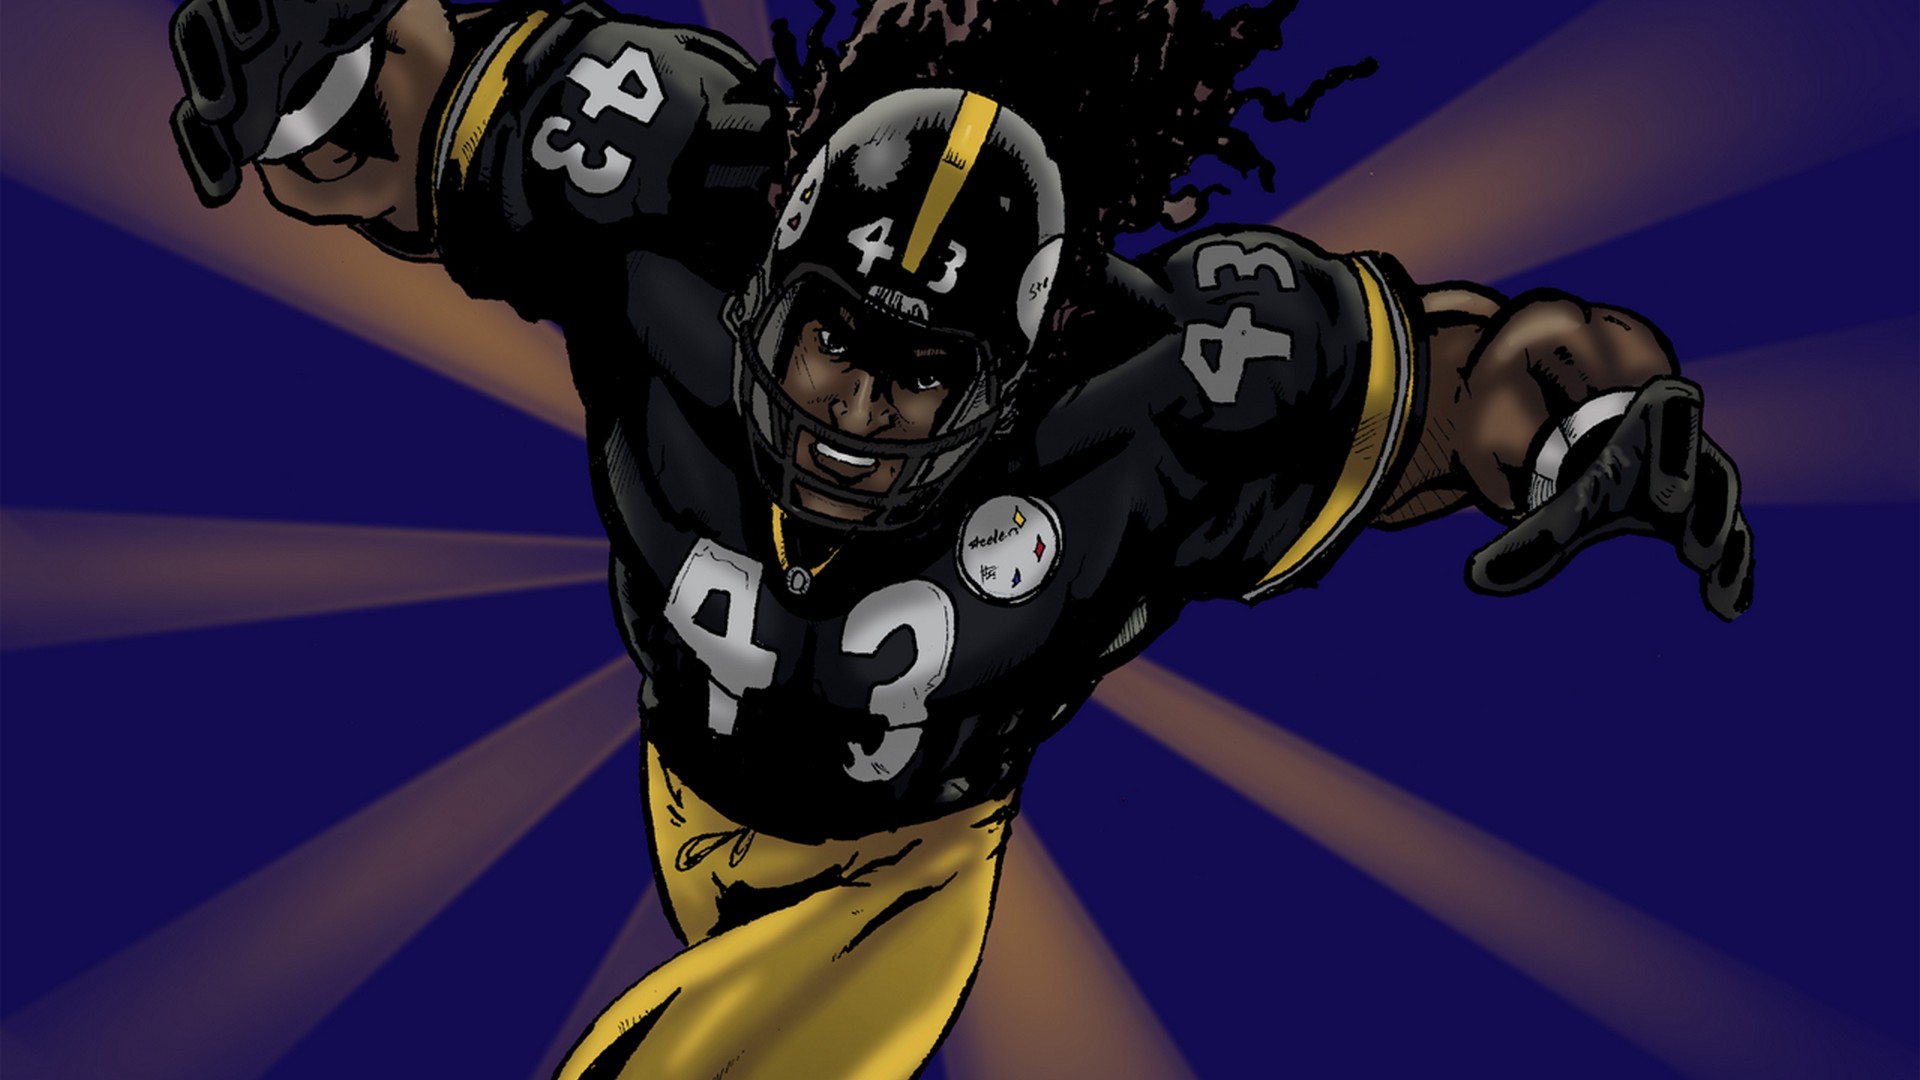 Wallpapers HD Steelers Football with resolution 1920x1080 pixel. You can make this wallpaper for your Mac or Windows Desktop Background, iPhone, Android or Tablet and another Smartphone device